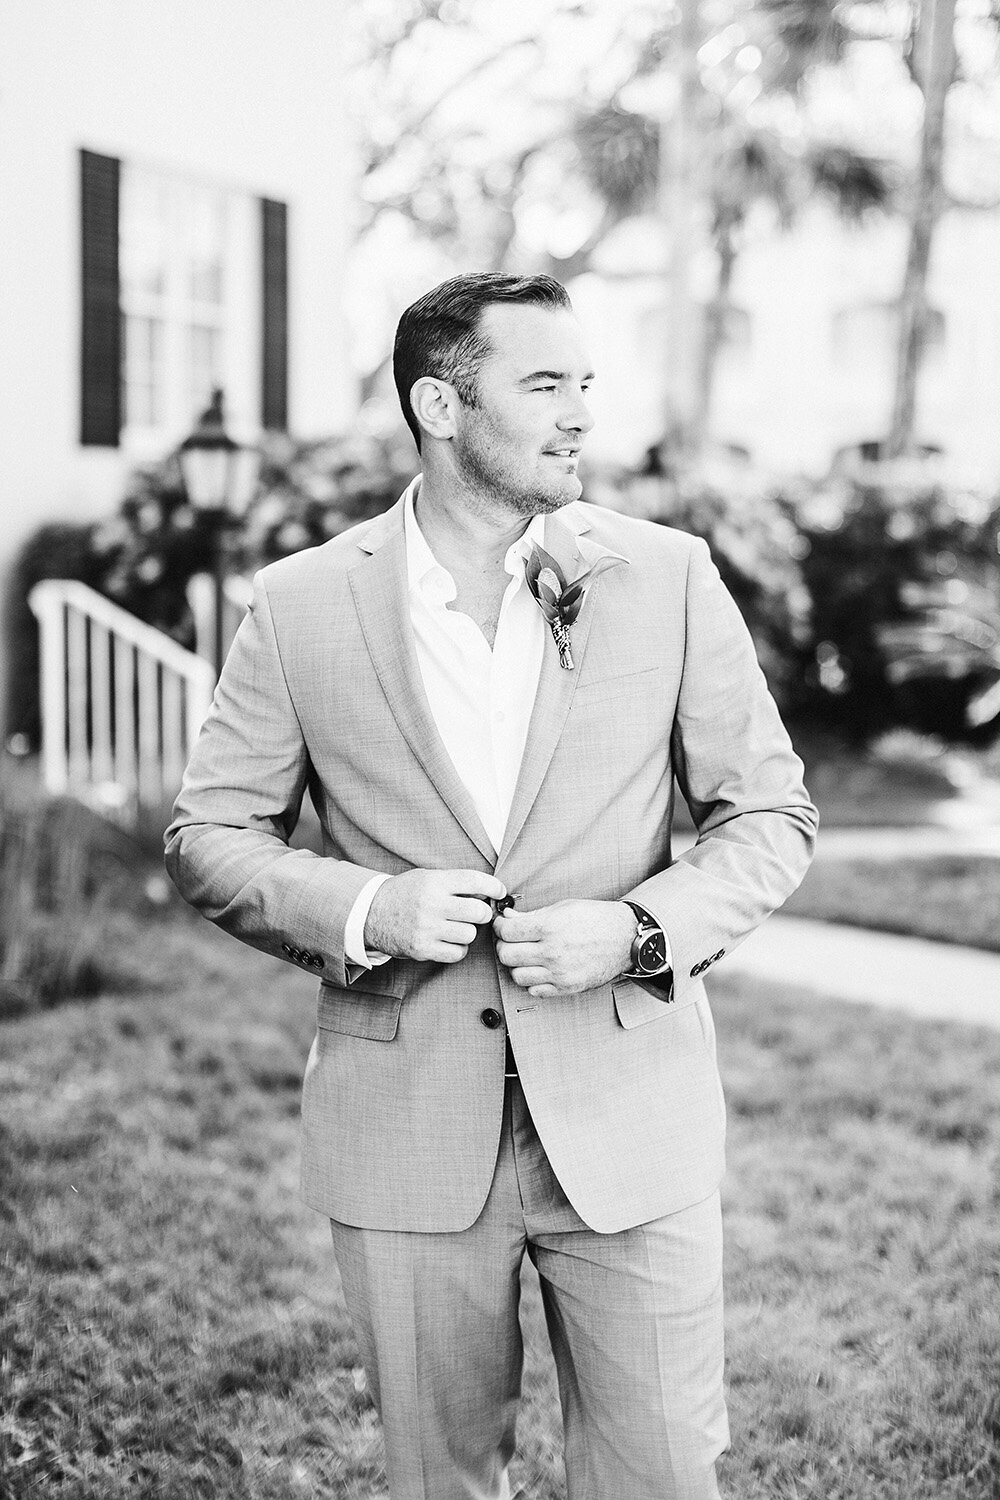 Groom buttoning jacket looking right.